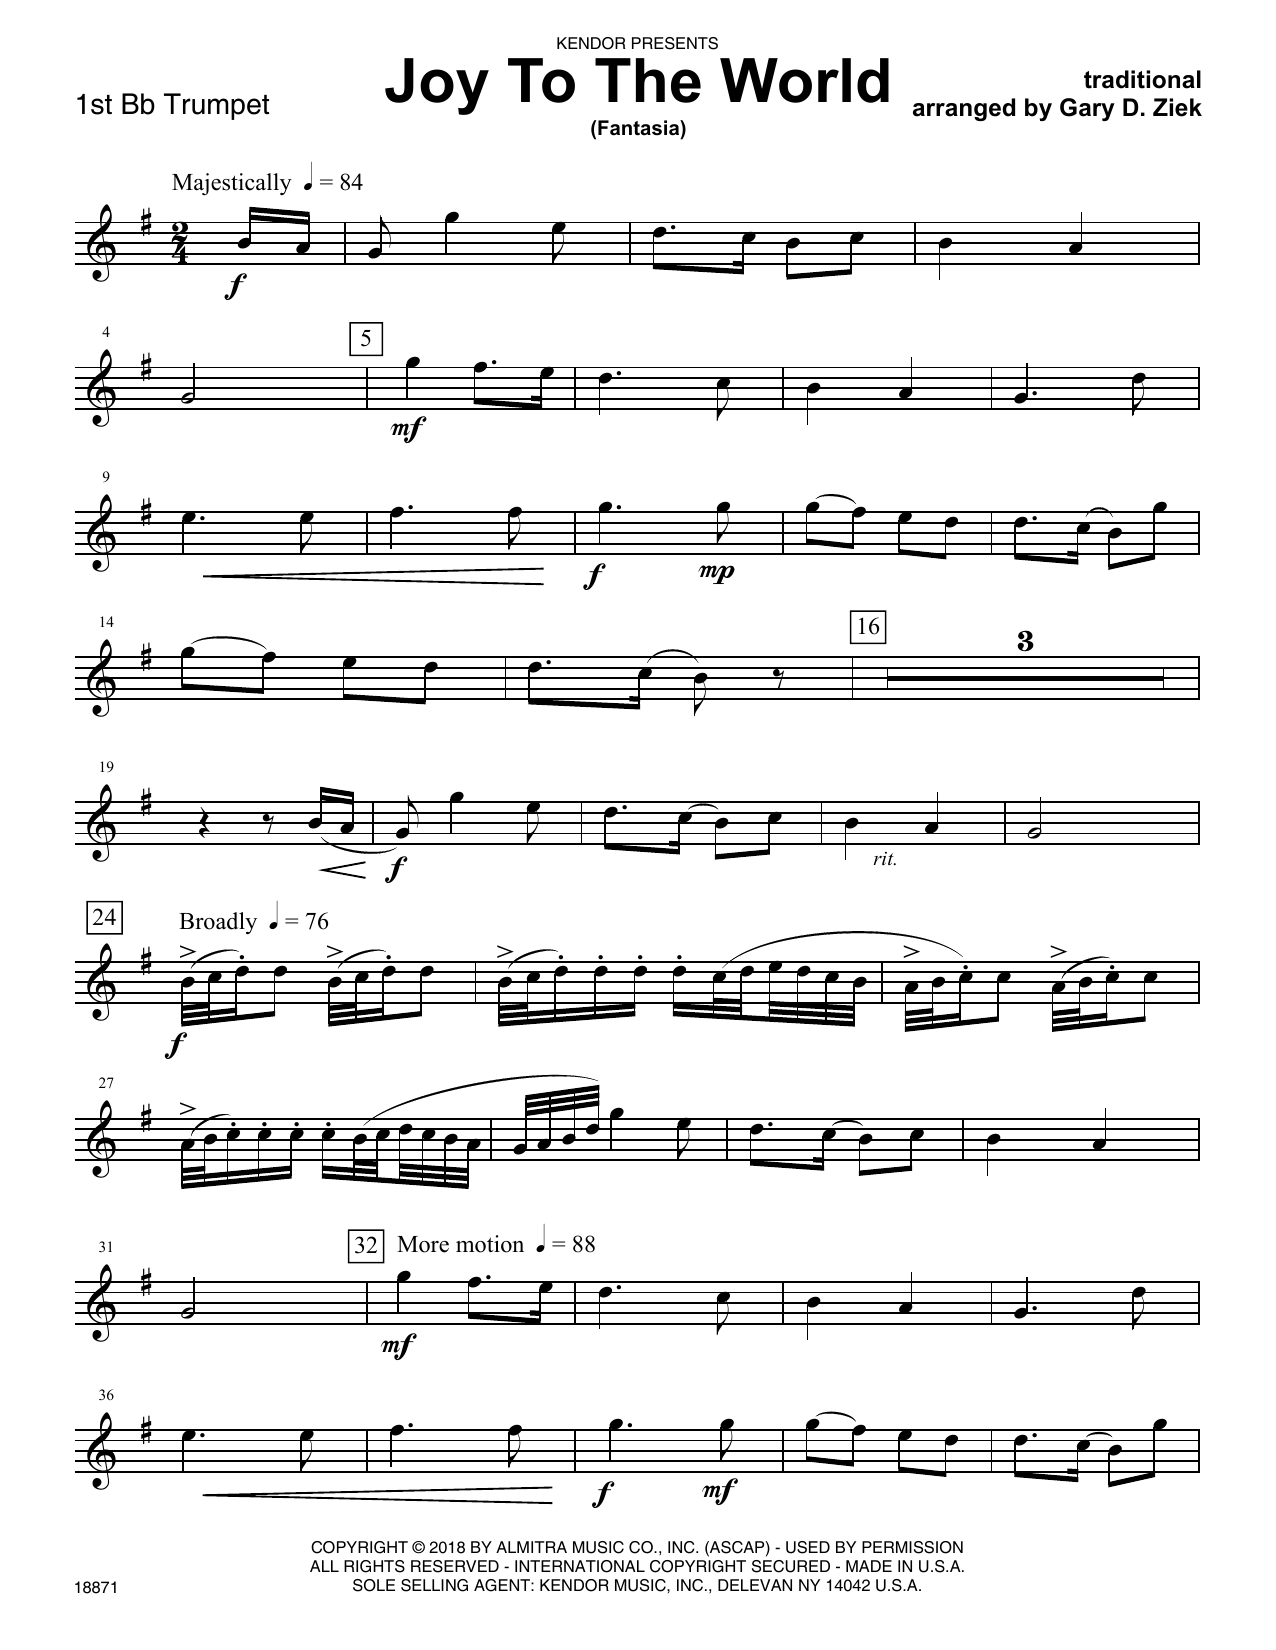 Gary Ziek Joy To The World (fantasia) - 1st Bb Trumpet sheet music notes and chords. Download Printable PDF.